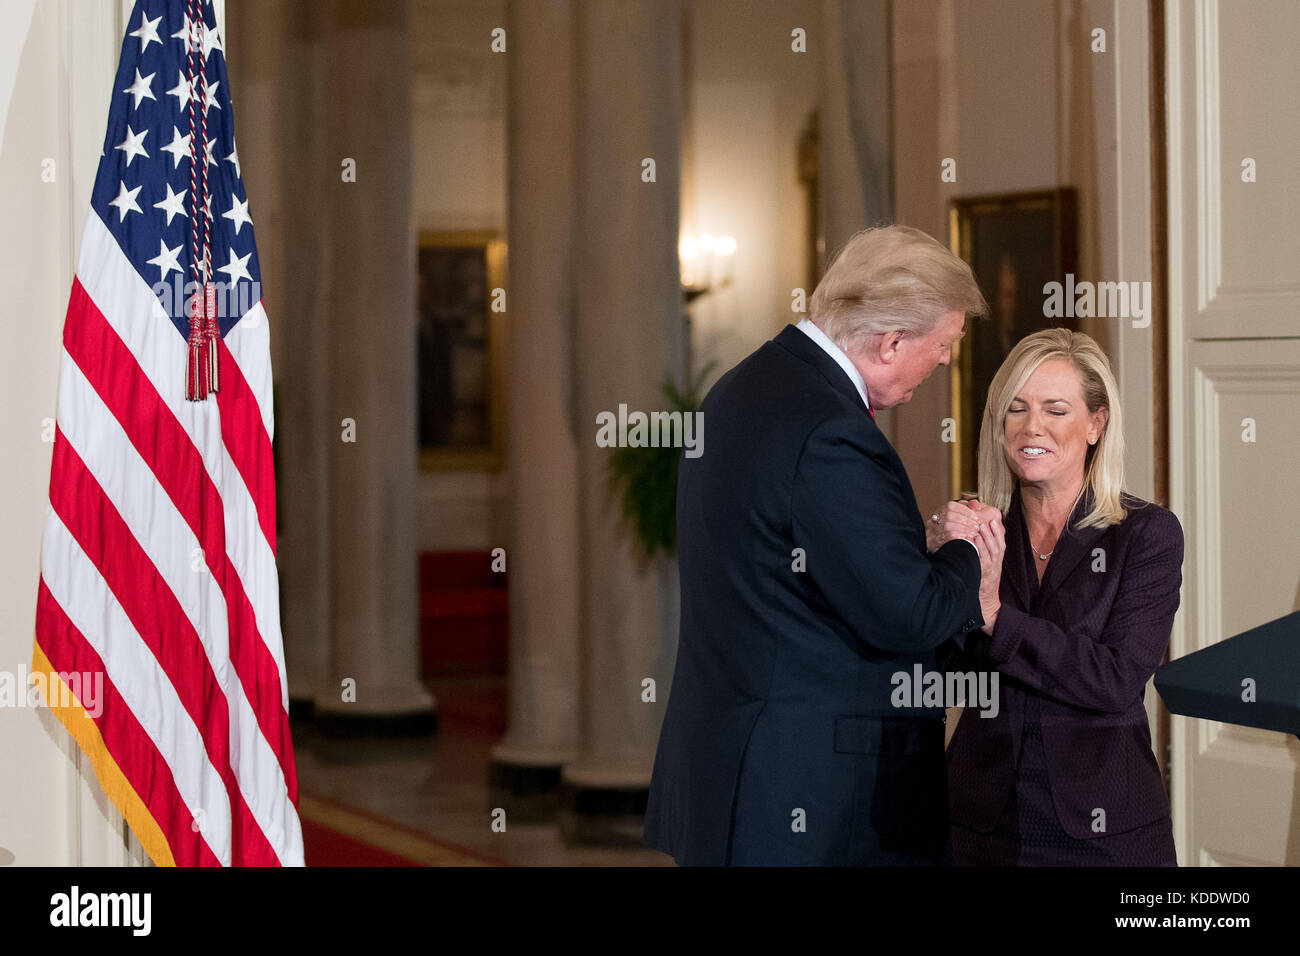 Washington, USA. 12th Oct, 2017. U.S. President Donald Trump (L) shakes hands with Kirstjen Nielsen during her nomination announcement at the White House in Washington, DC, the United States, on Oct. 12, 2017. Trump on Wednesday nominated Kirstjen Nielsen, an aide to White House Chief of Staff John Kelly, to be Secretary of Homeland Security. Credit: Ting Shen/Xinhua/Alamy Live News Stock Photo